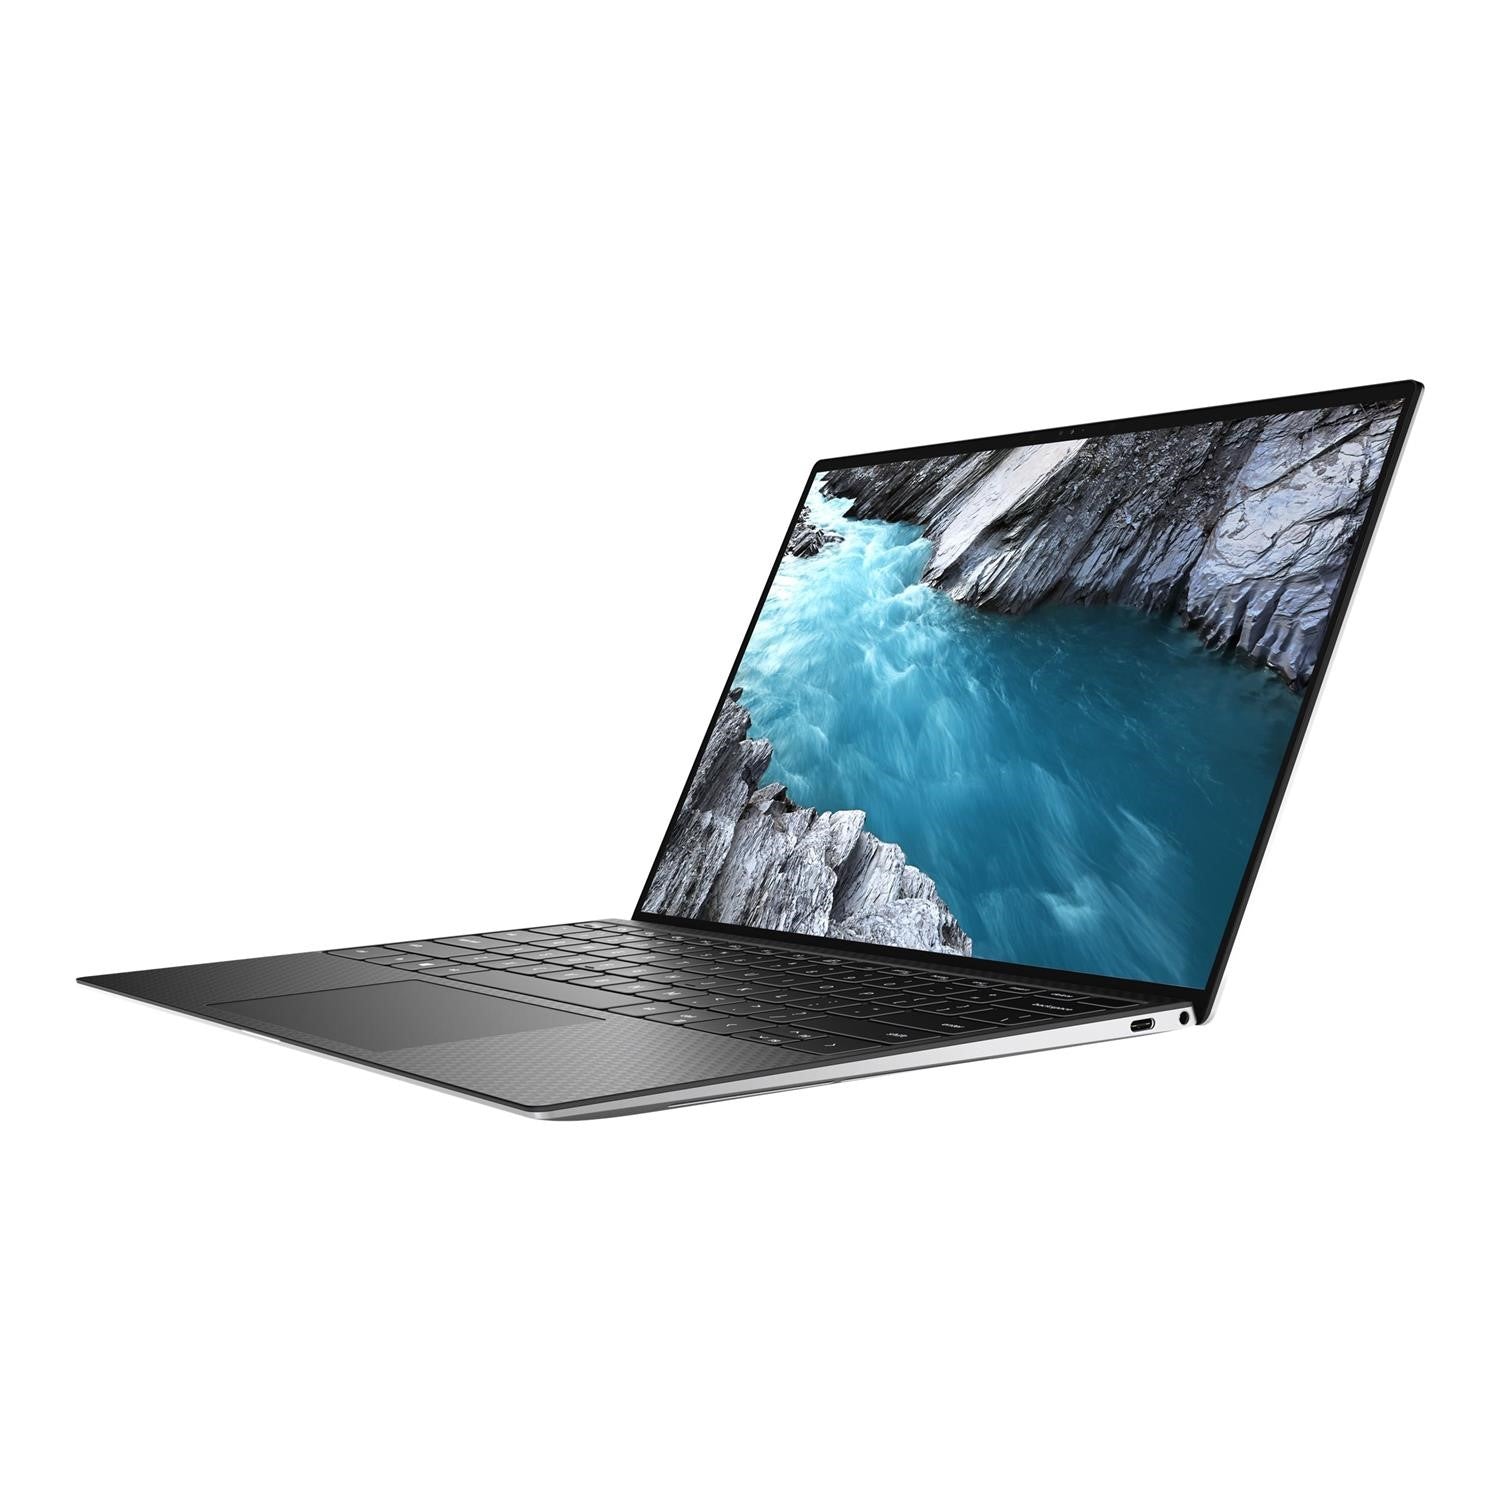 Dell XPS 13 9310 Laptop Intel Core i7 16GB RAM 512GB SSD 13.4" - Platinum Silver - Refurbished Excellent